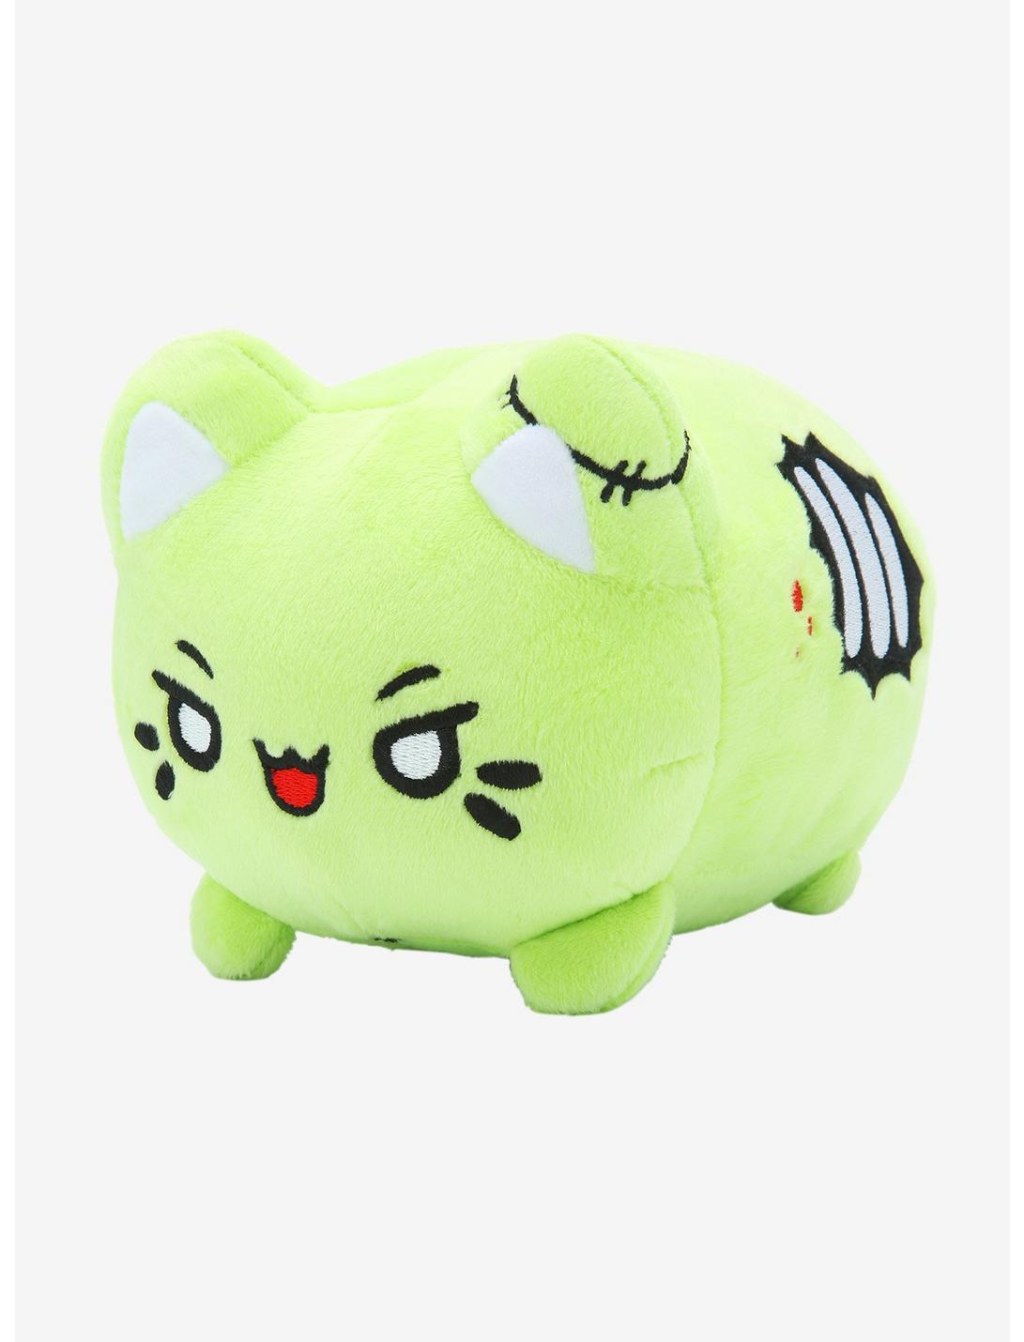 Picture of: Tasty Peach Zombie Meowchi Plush Toy